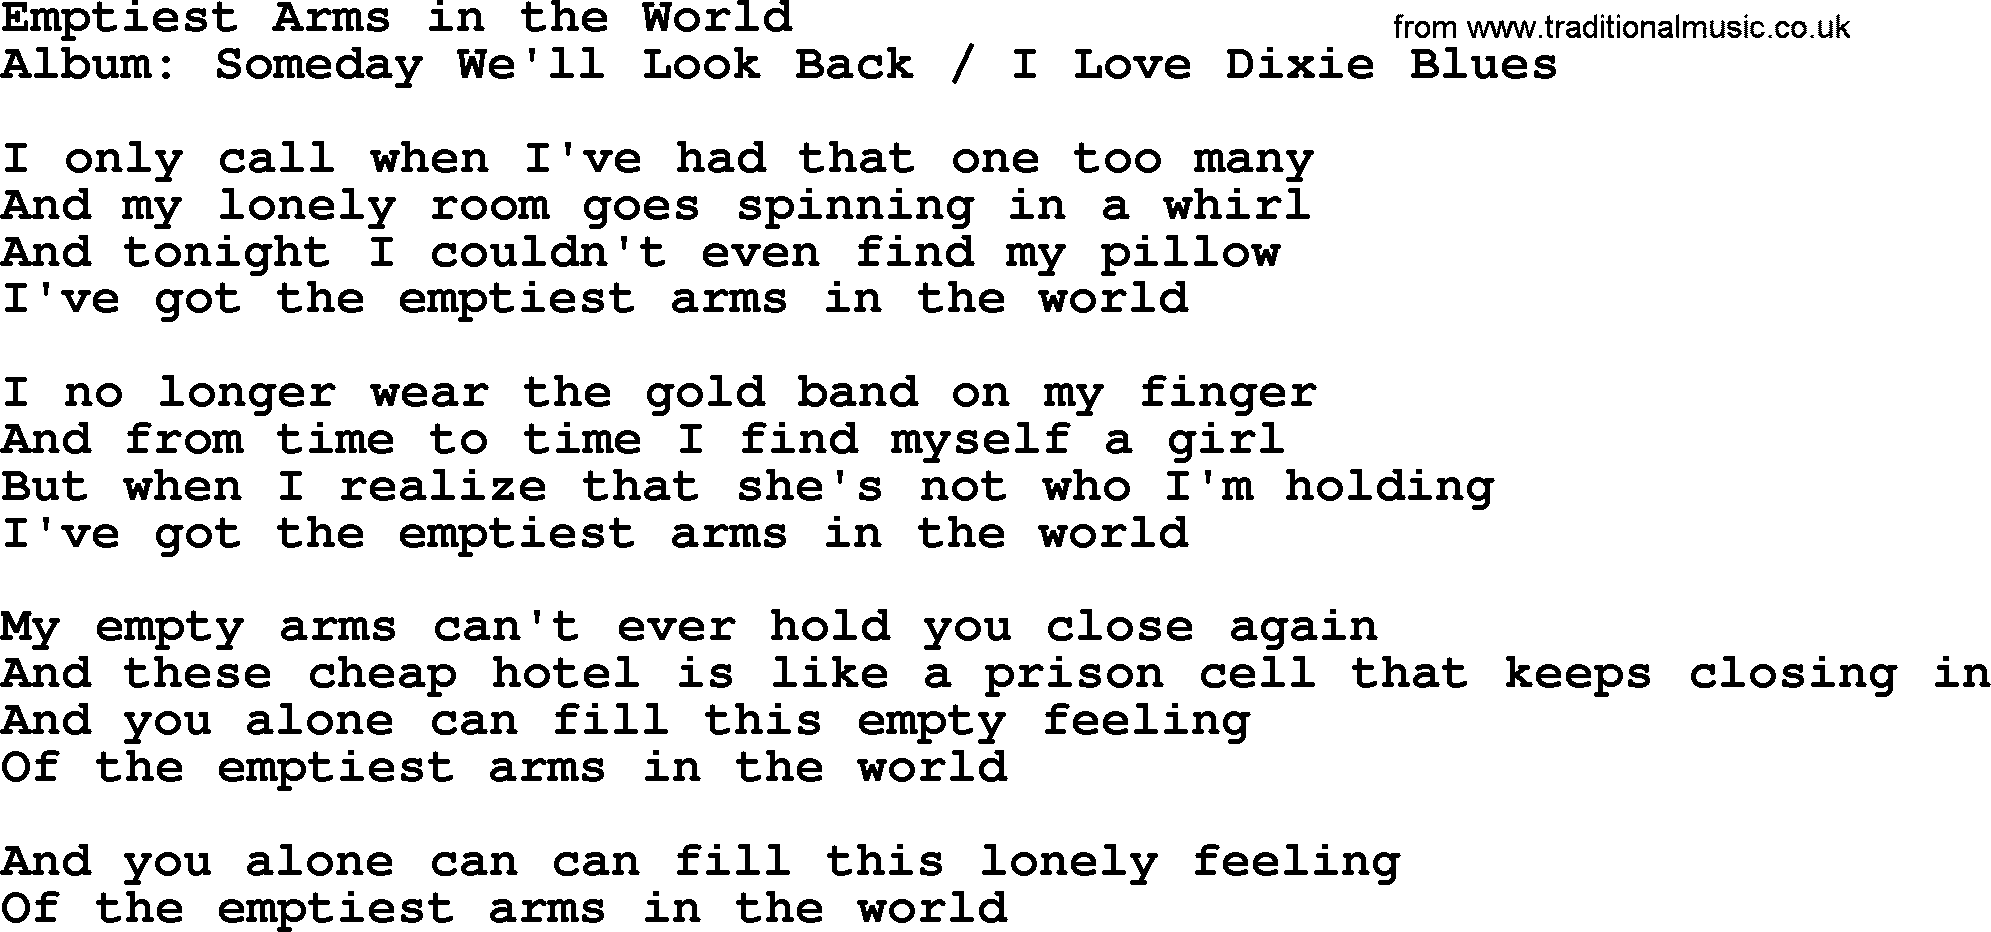 Merle Haggard song: Emptiest Arms In The World, lyrics.